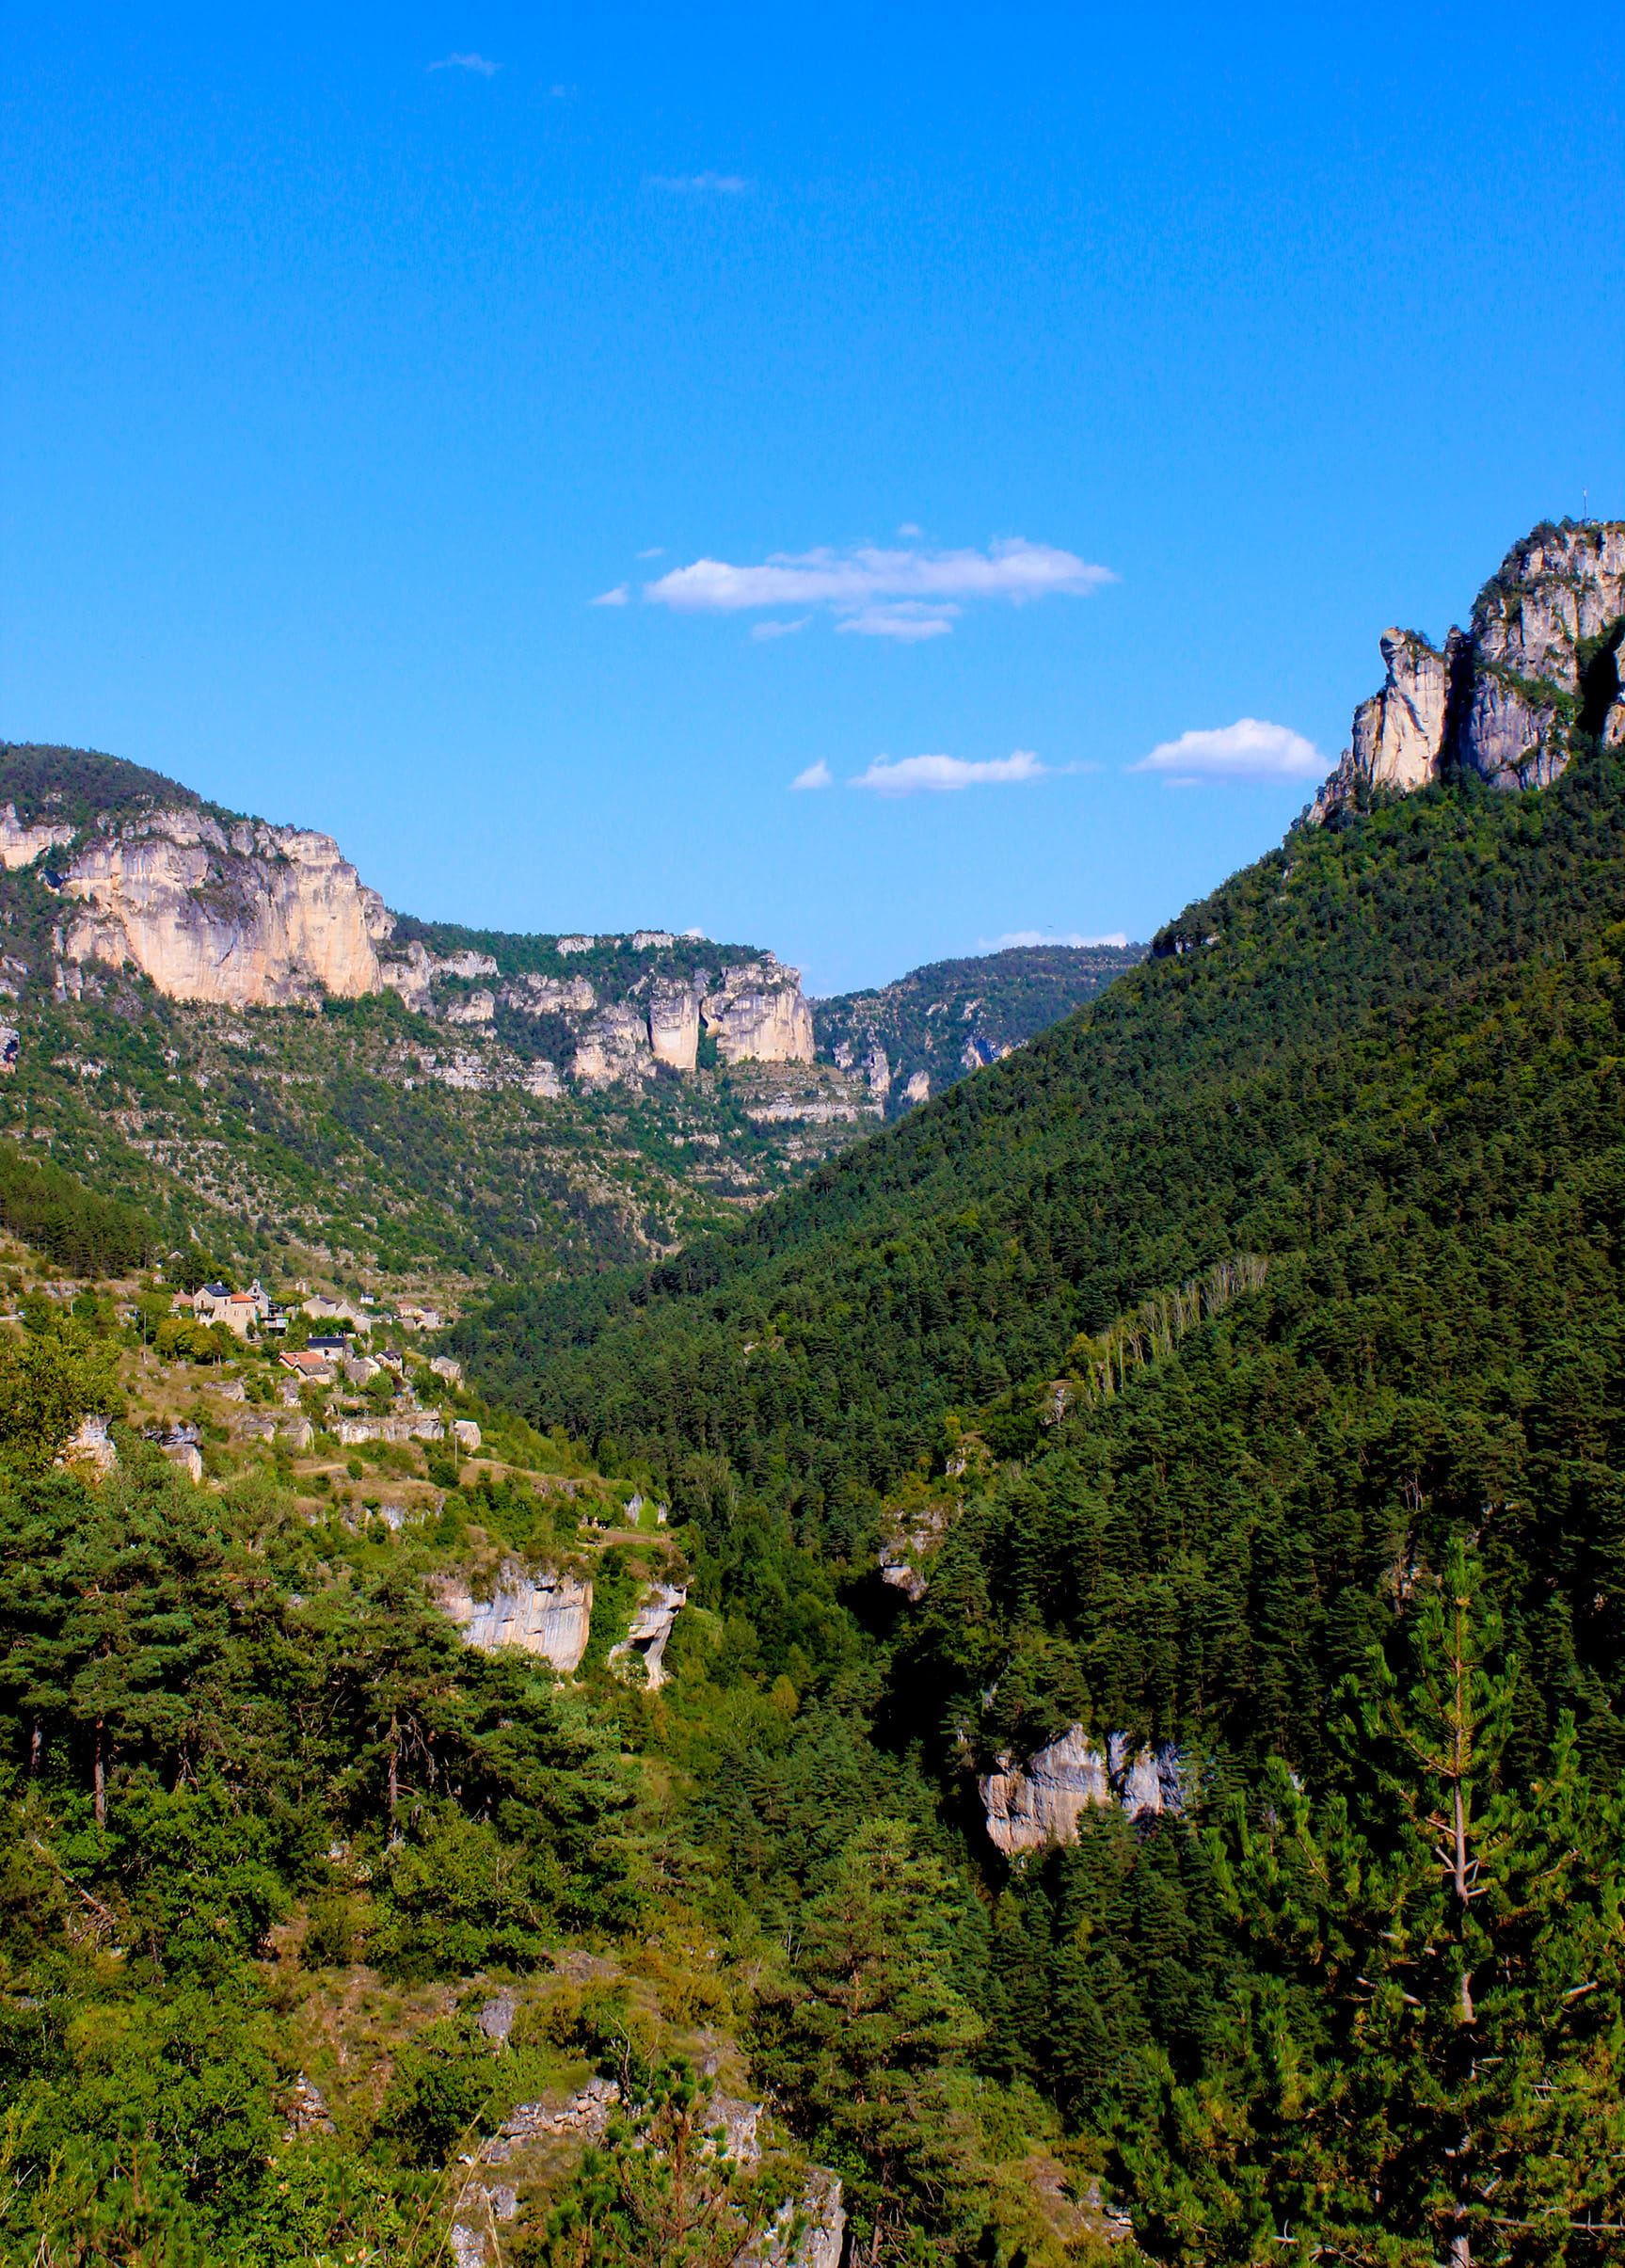 Typical Landscape in Gorges du Tarn - One of the Largest Canyons in Europe - Southern France